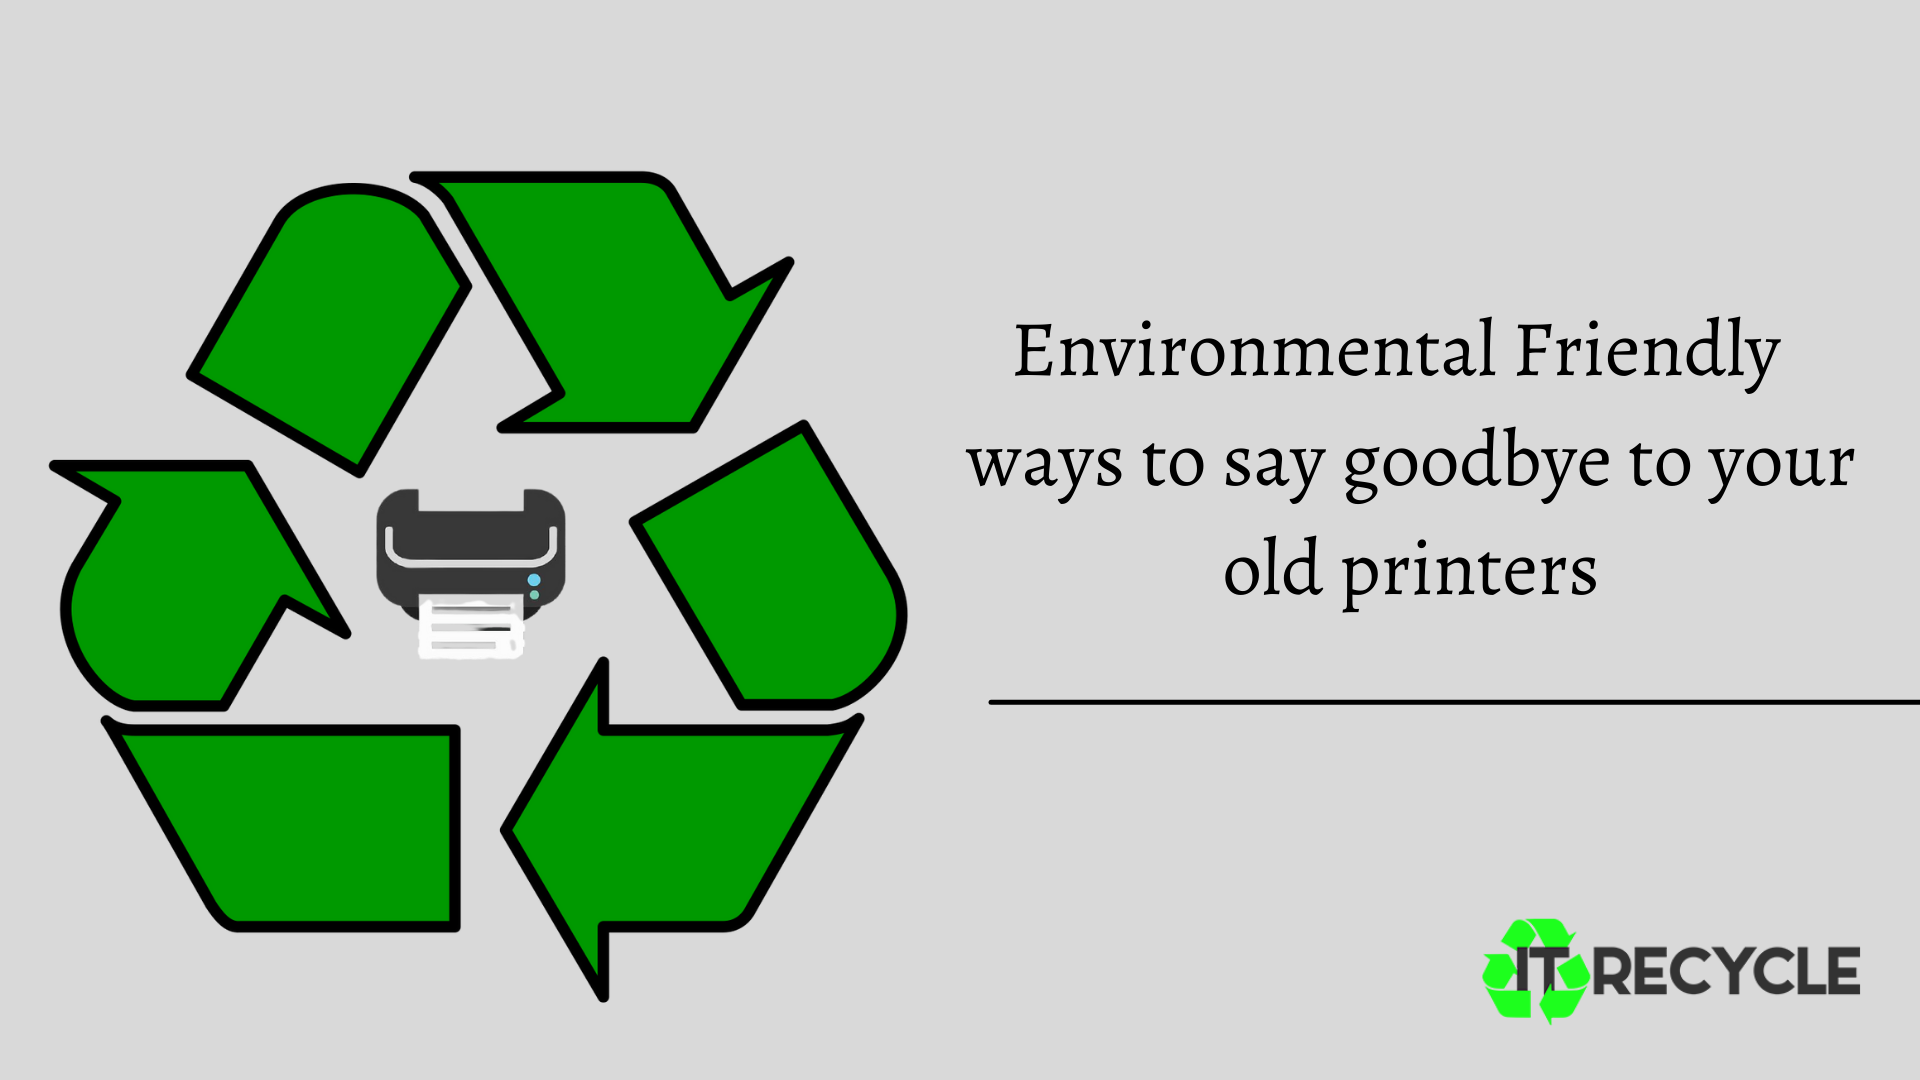 Environment Safe ways to say goodbye to your old printers